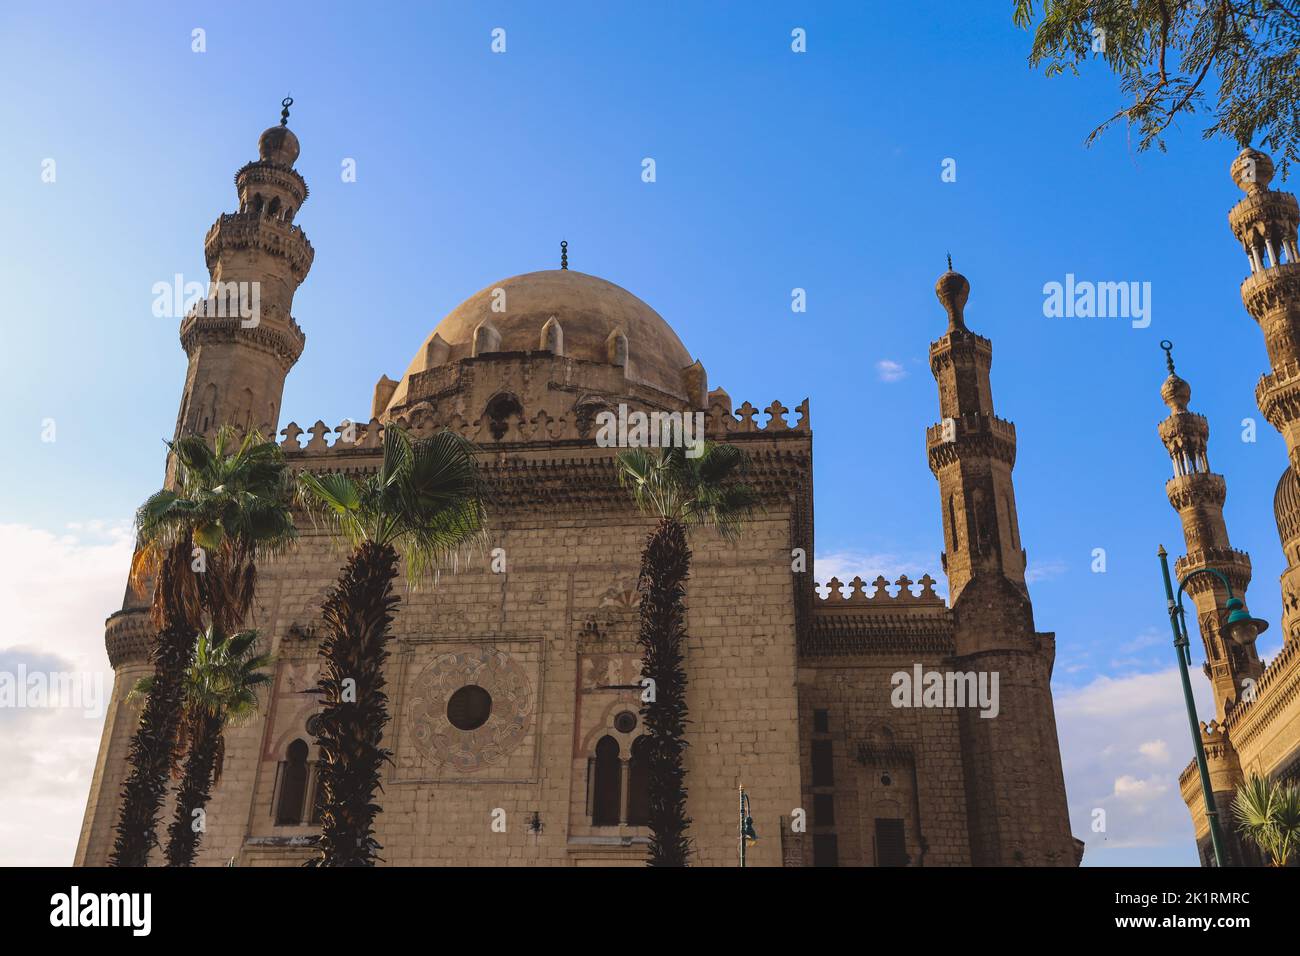 Cairo, Egypt - November 16, 2020: Panoramic view to the Mosque-Madrasa of Sultan Hassan under Blue Sky in the Heart of Egyptian Capital Cairo Stock Photo